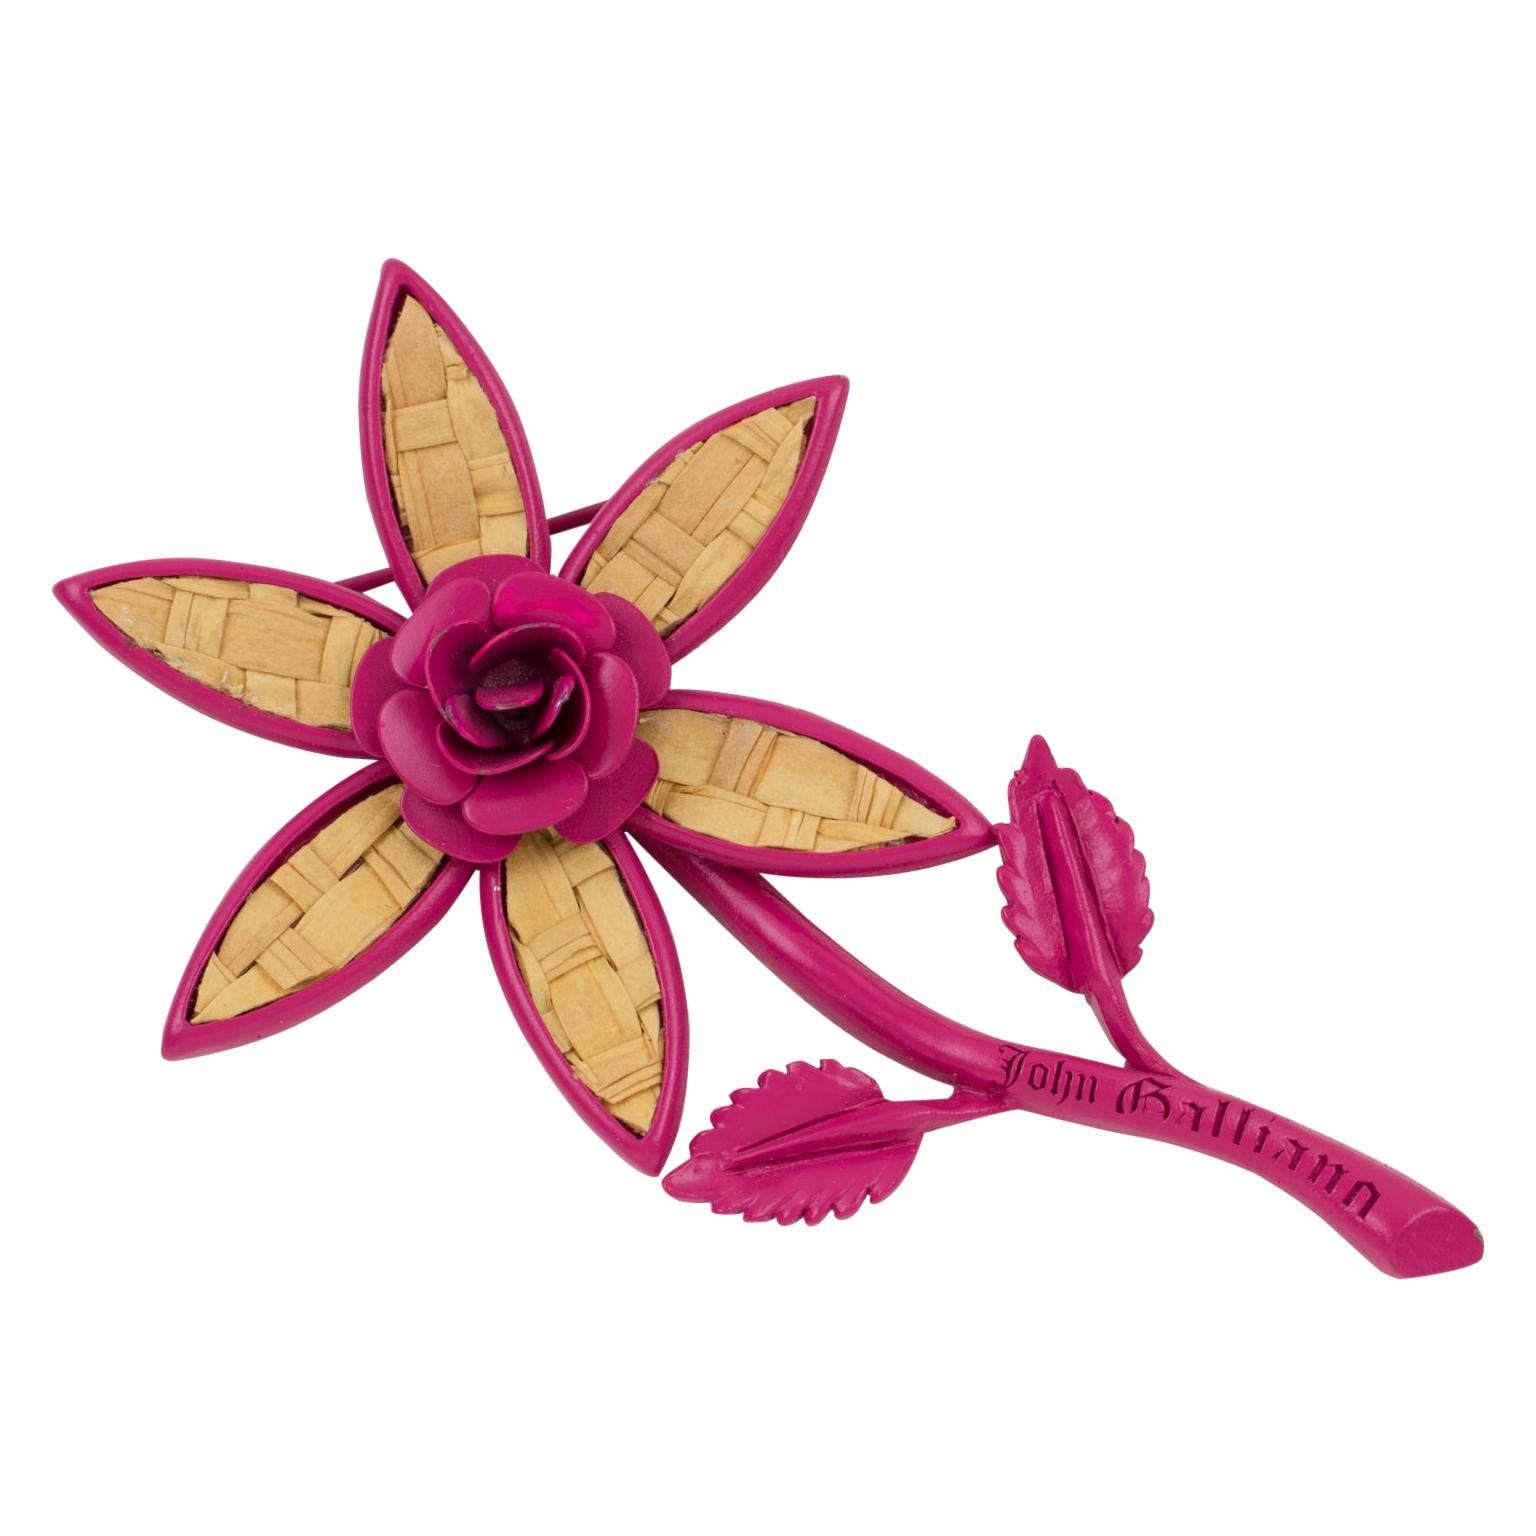 John Galliano Pink Enamel and Straw Daisy Flower Pin Brooch For Sale